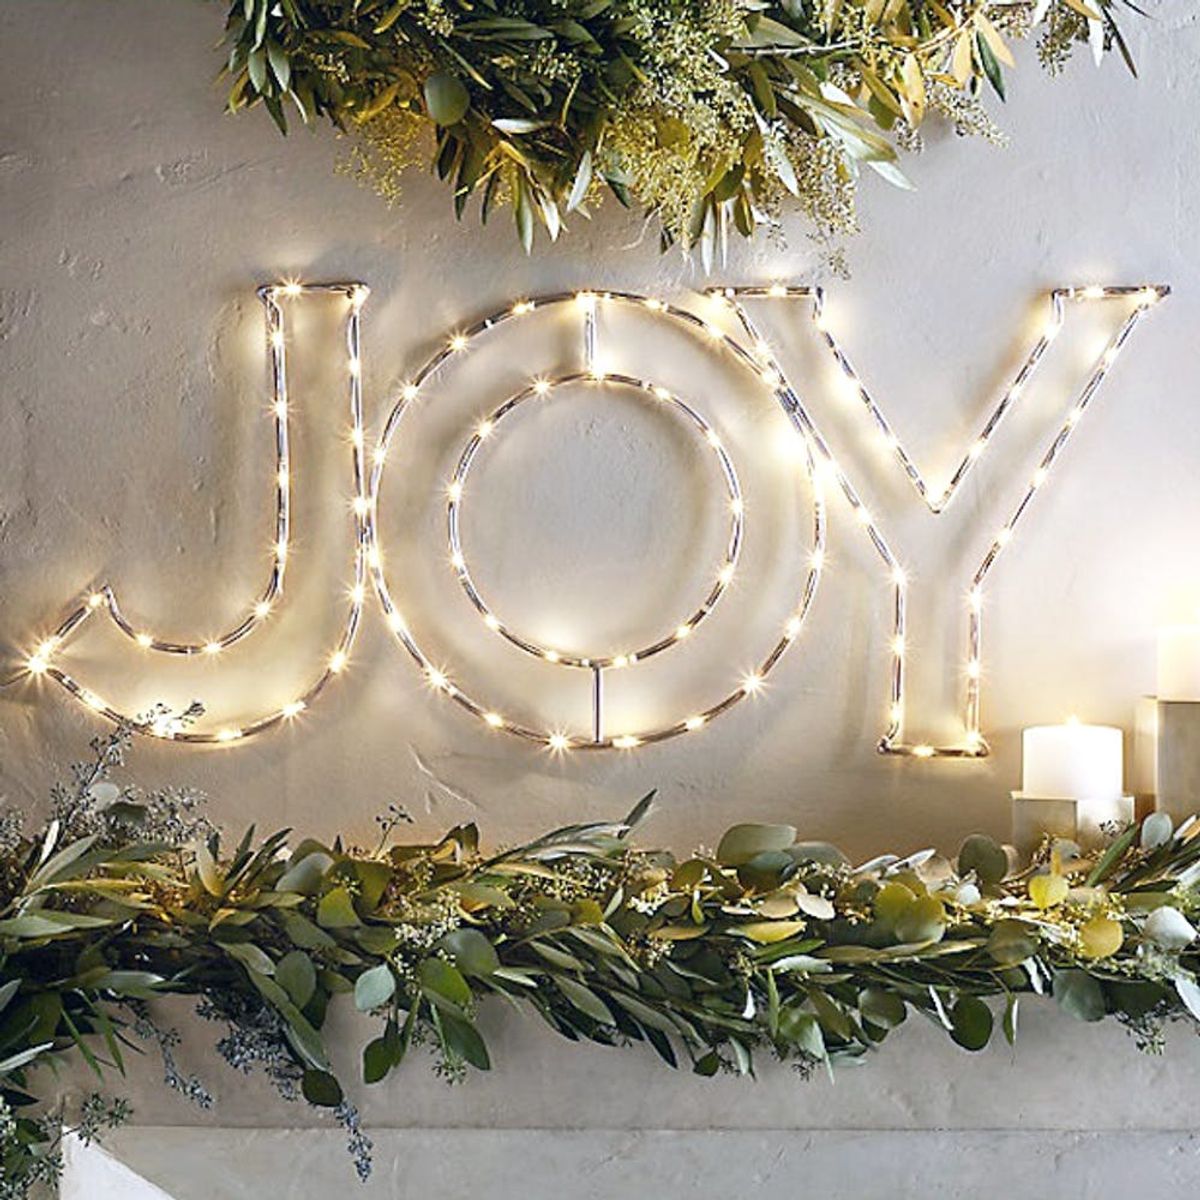 11 Festive Decor Trends from Restoration Hardware’s Holiday Line